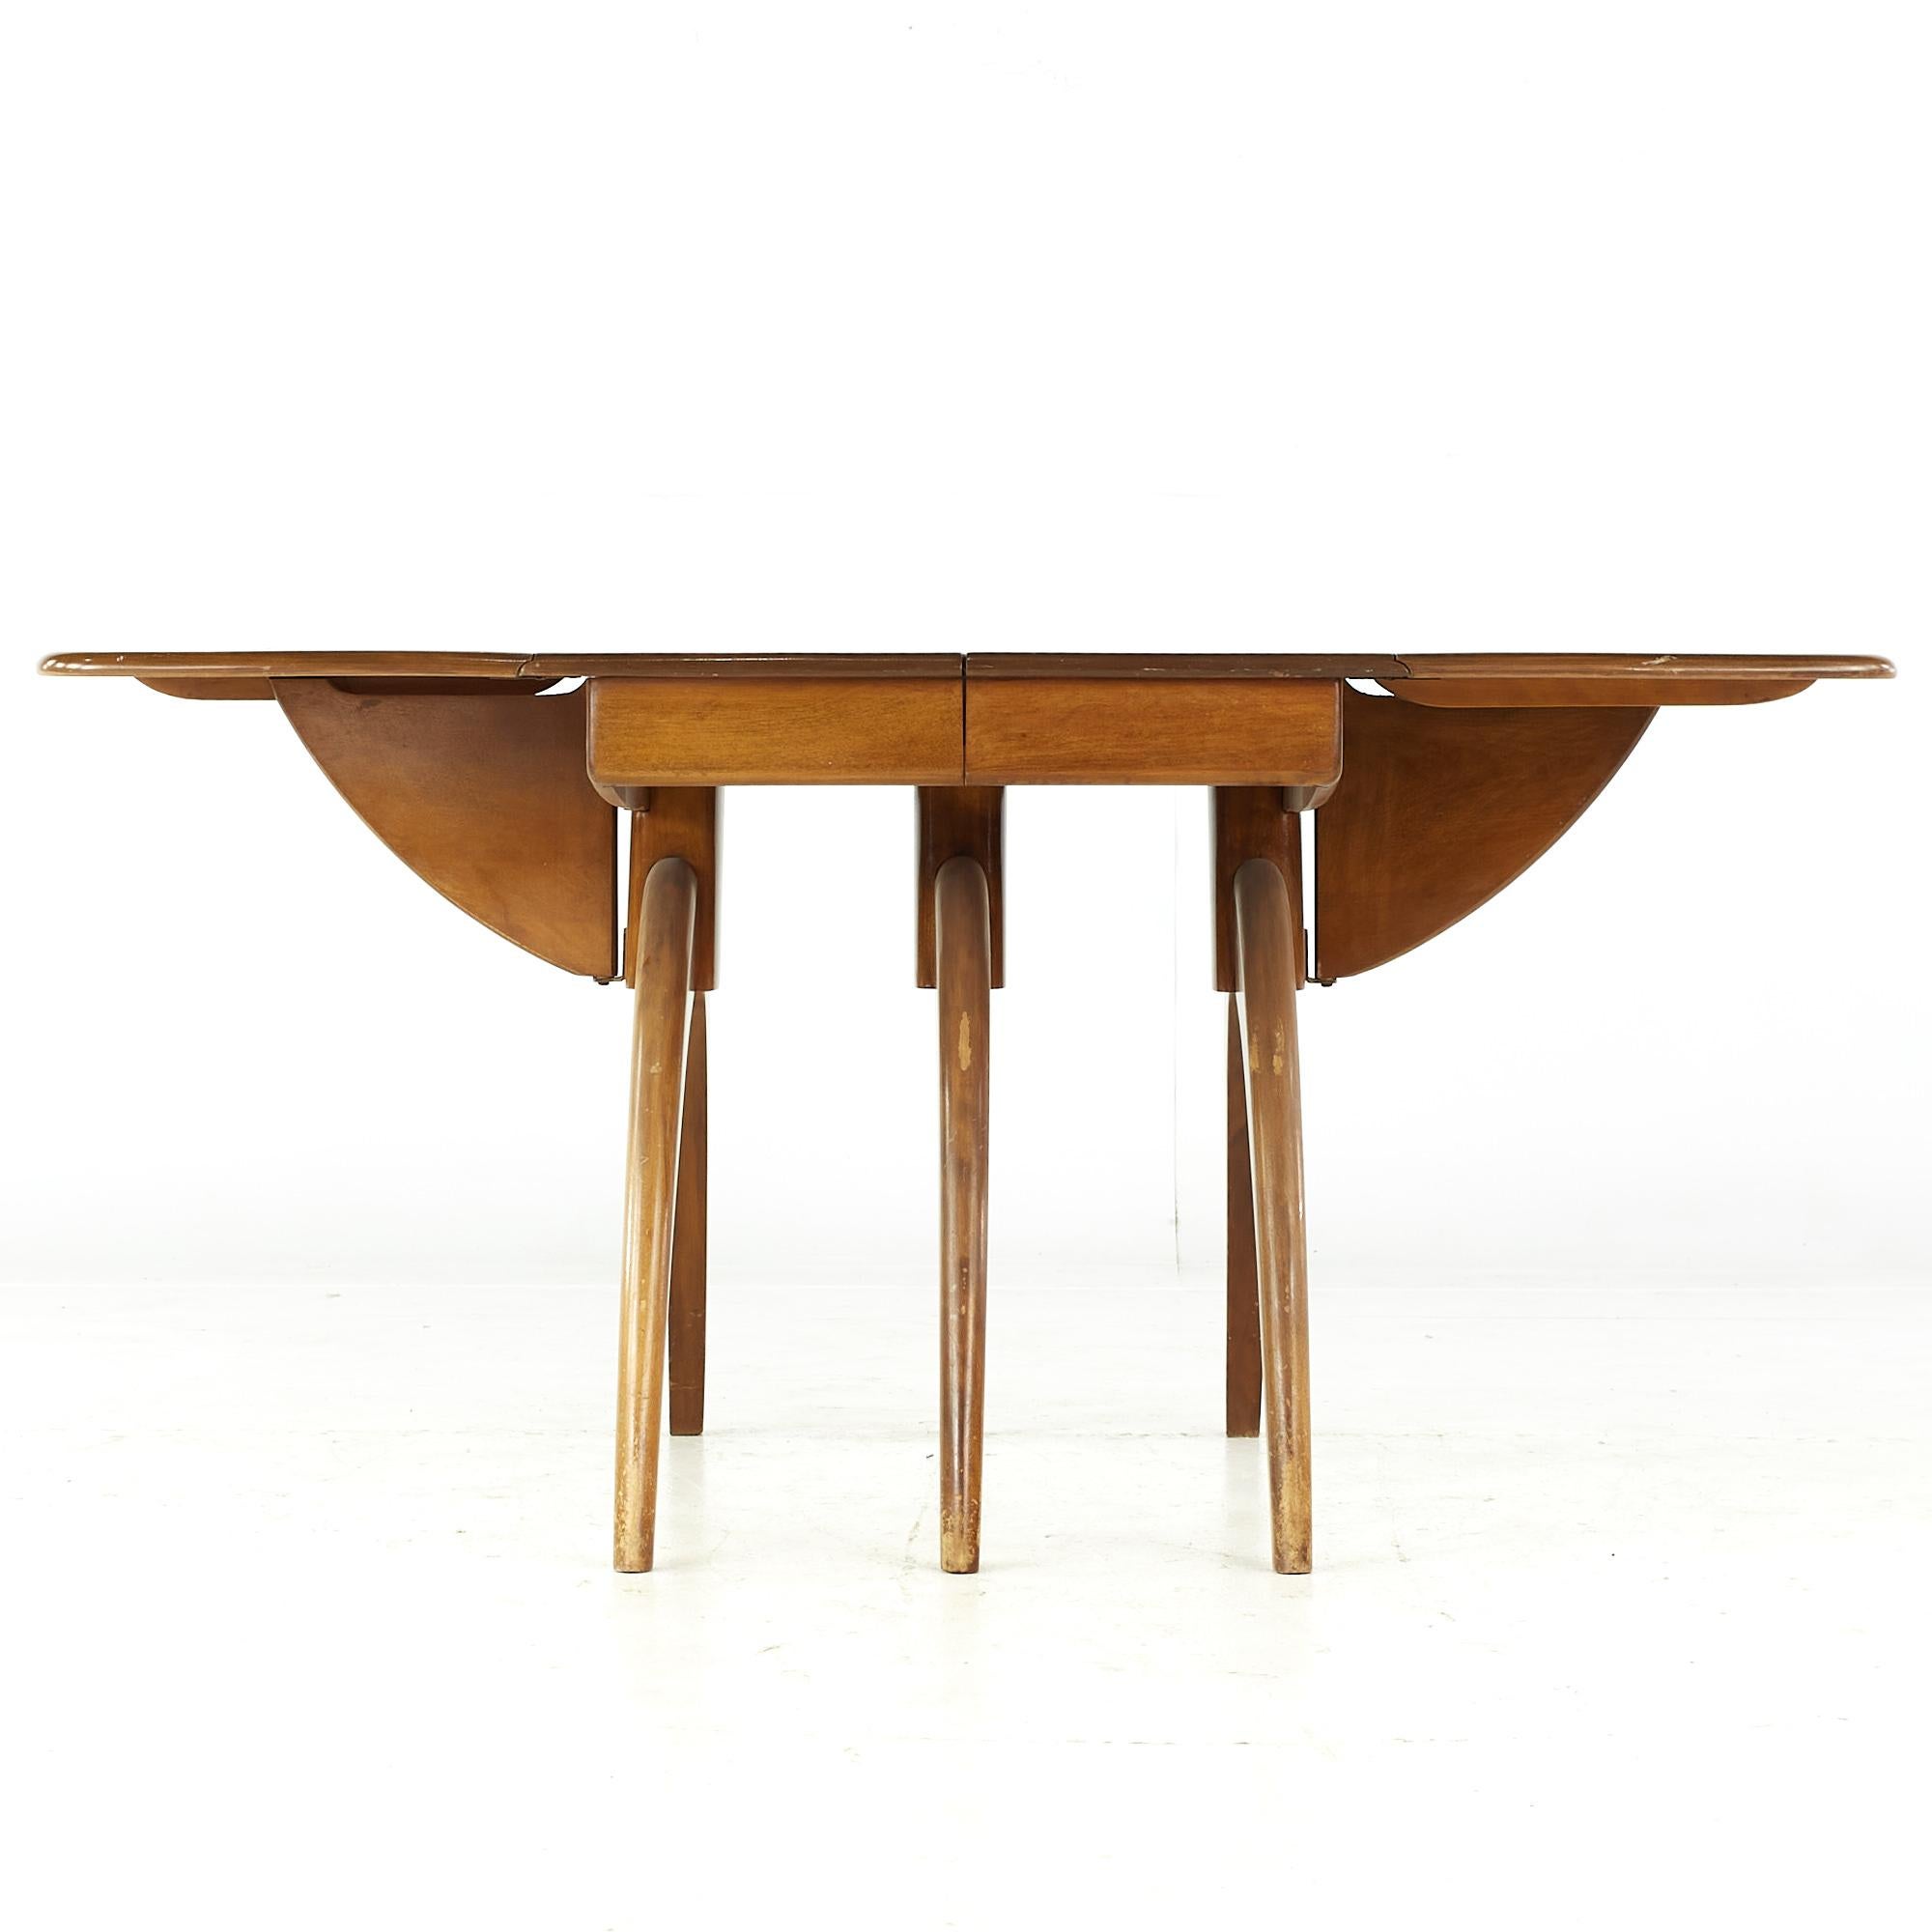 Late 20th Century Heywood Wakefield Midcentury Wishbone Expanding Dining Table with 2 Leaves For Sale